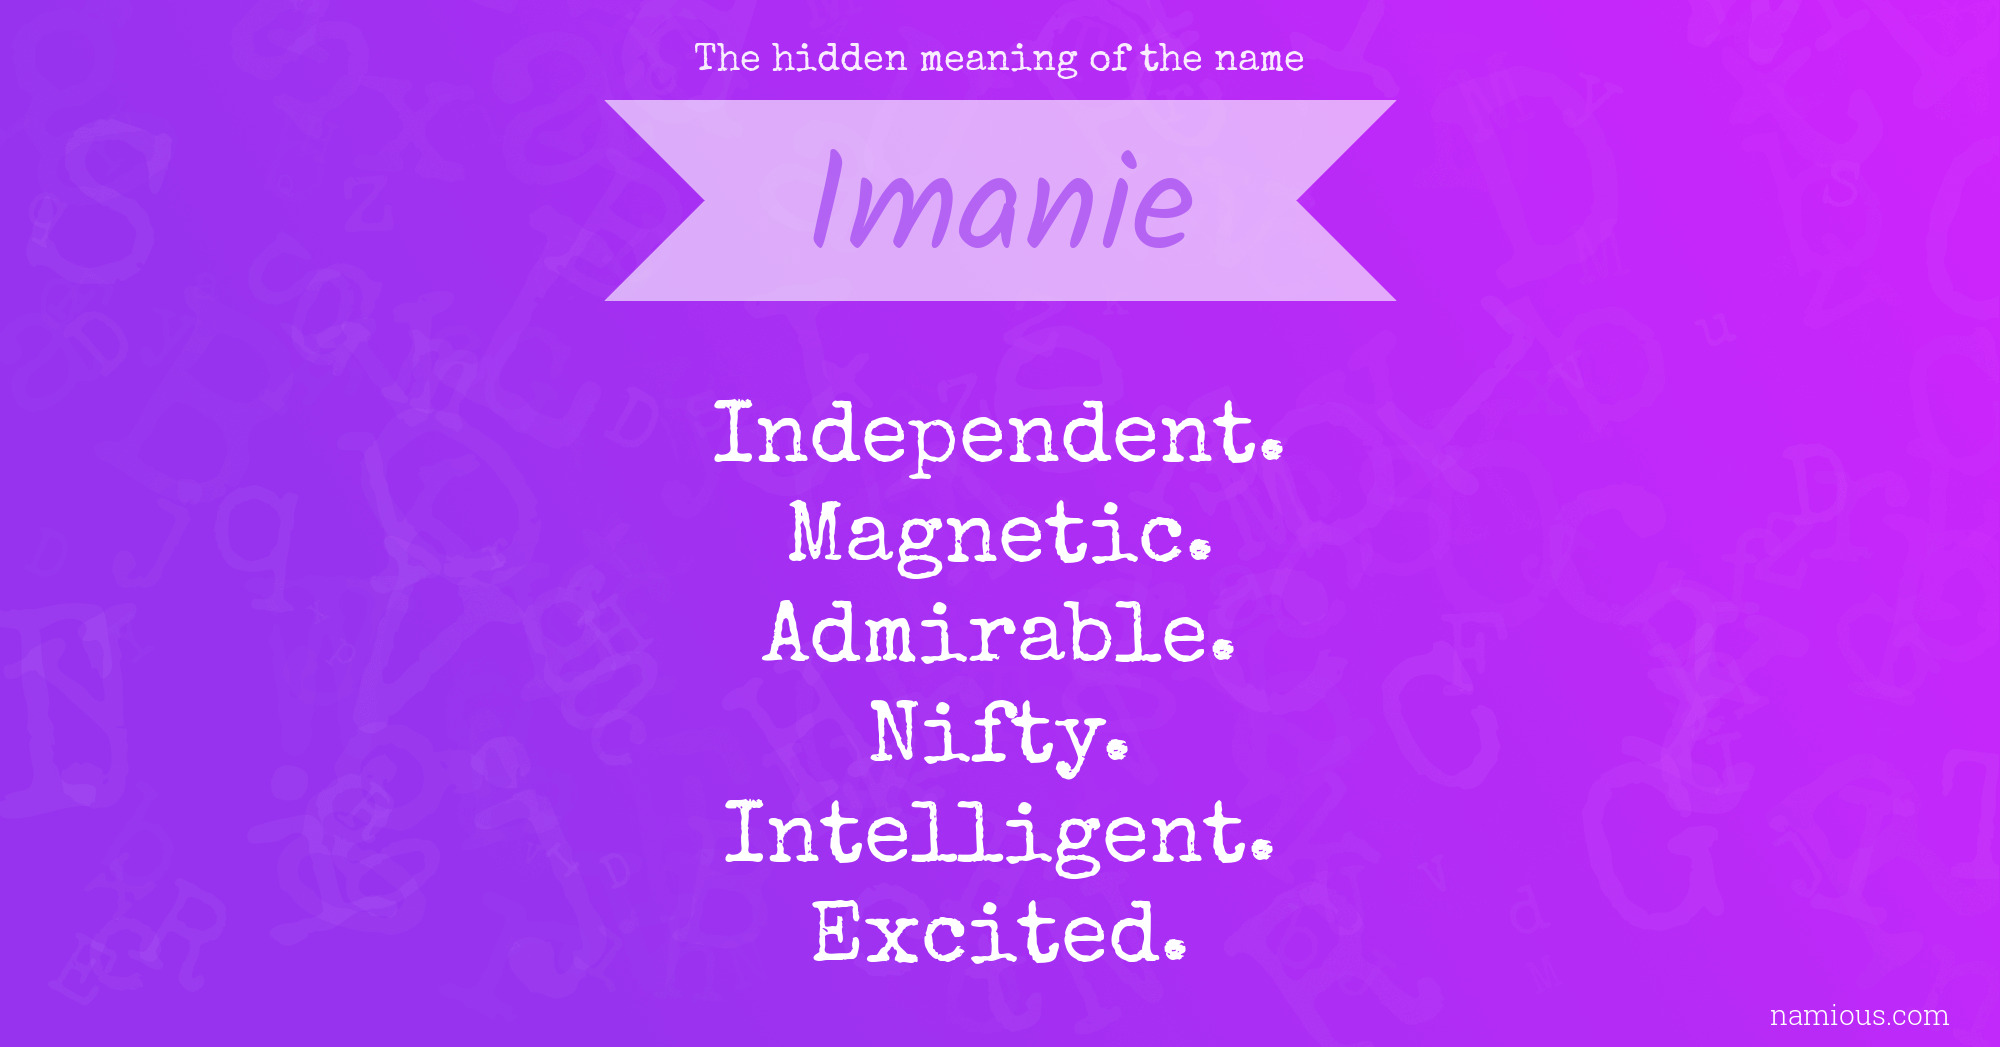 The hidden meaning of the name Imanie